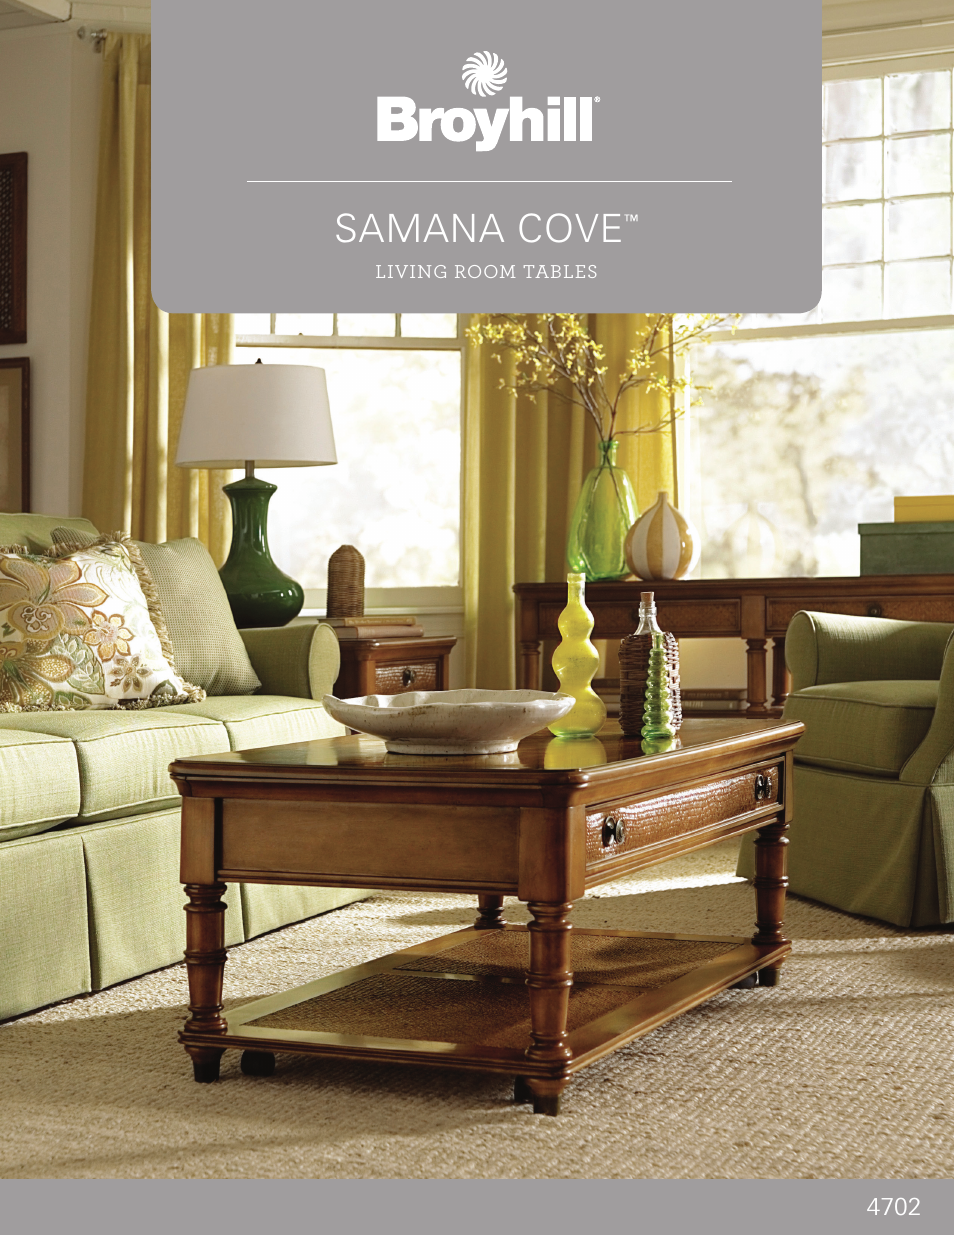 SAMANA COVE END TABLE Product Details